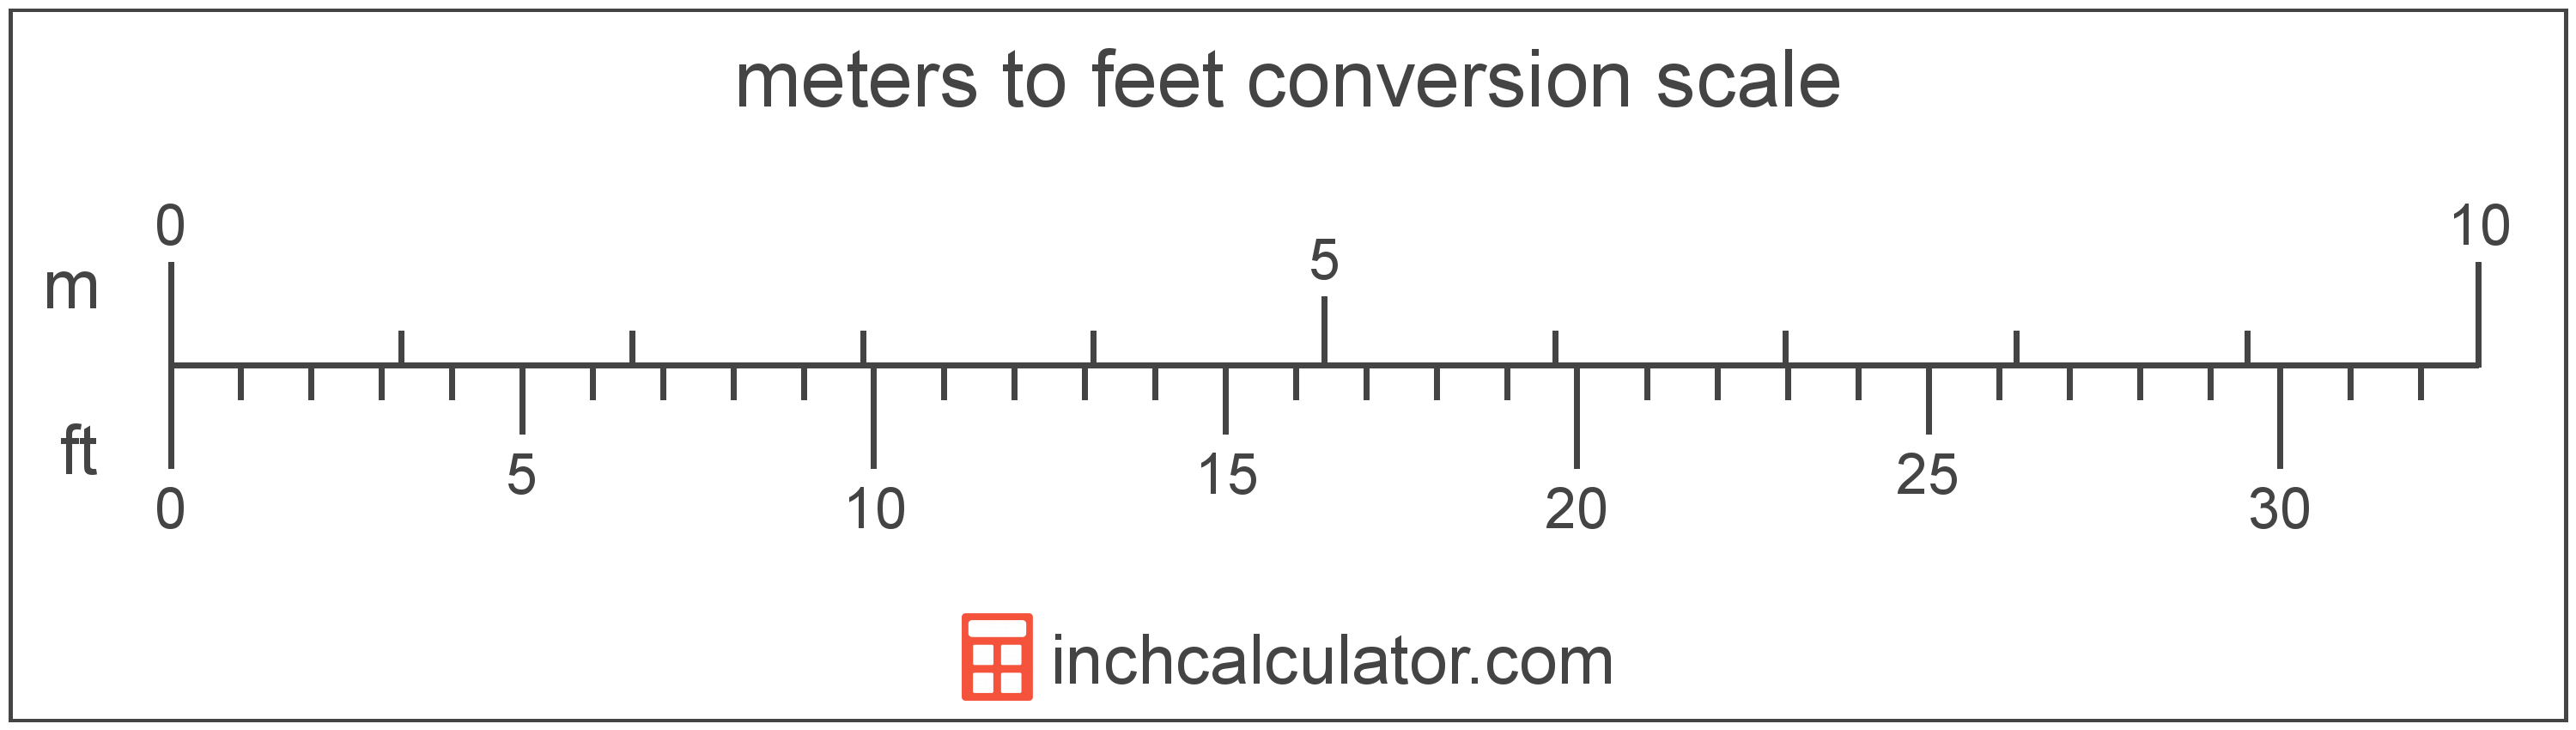 Height Converter - Feet & Inches to CM Conversions - Inch Calculator